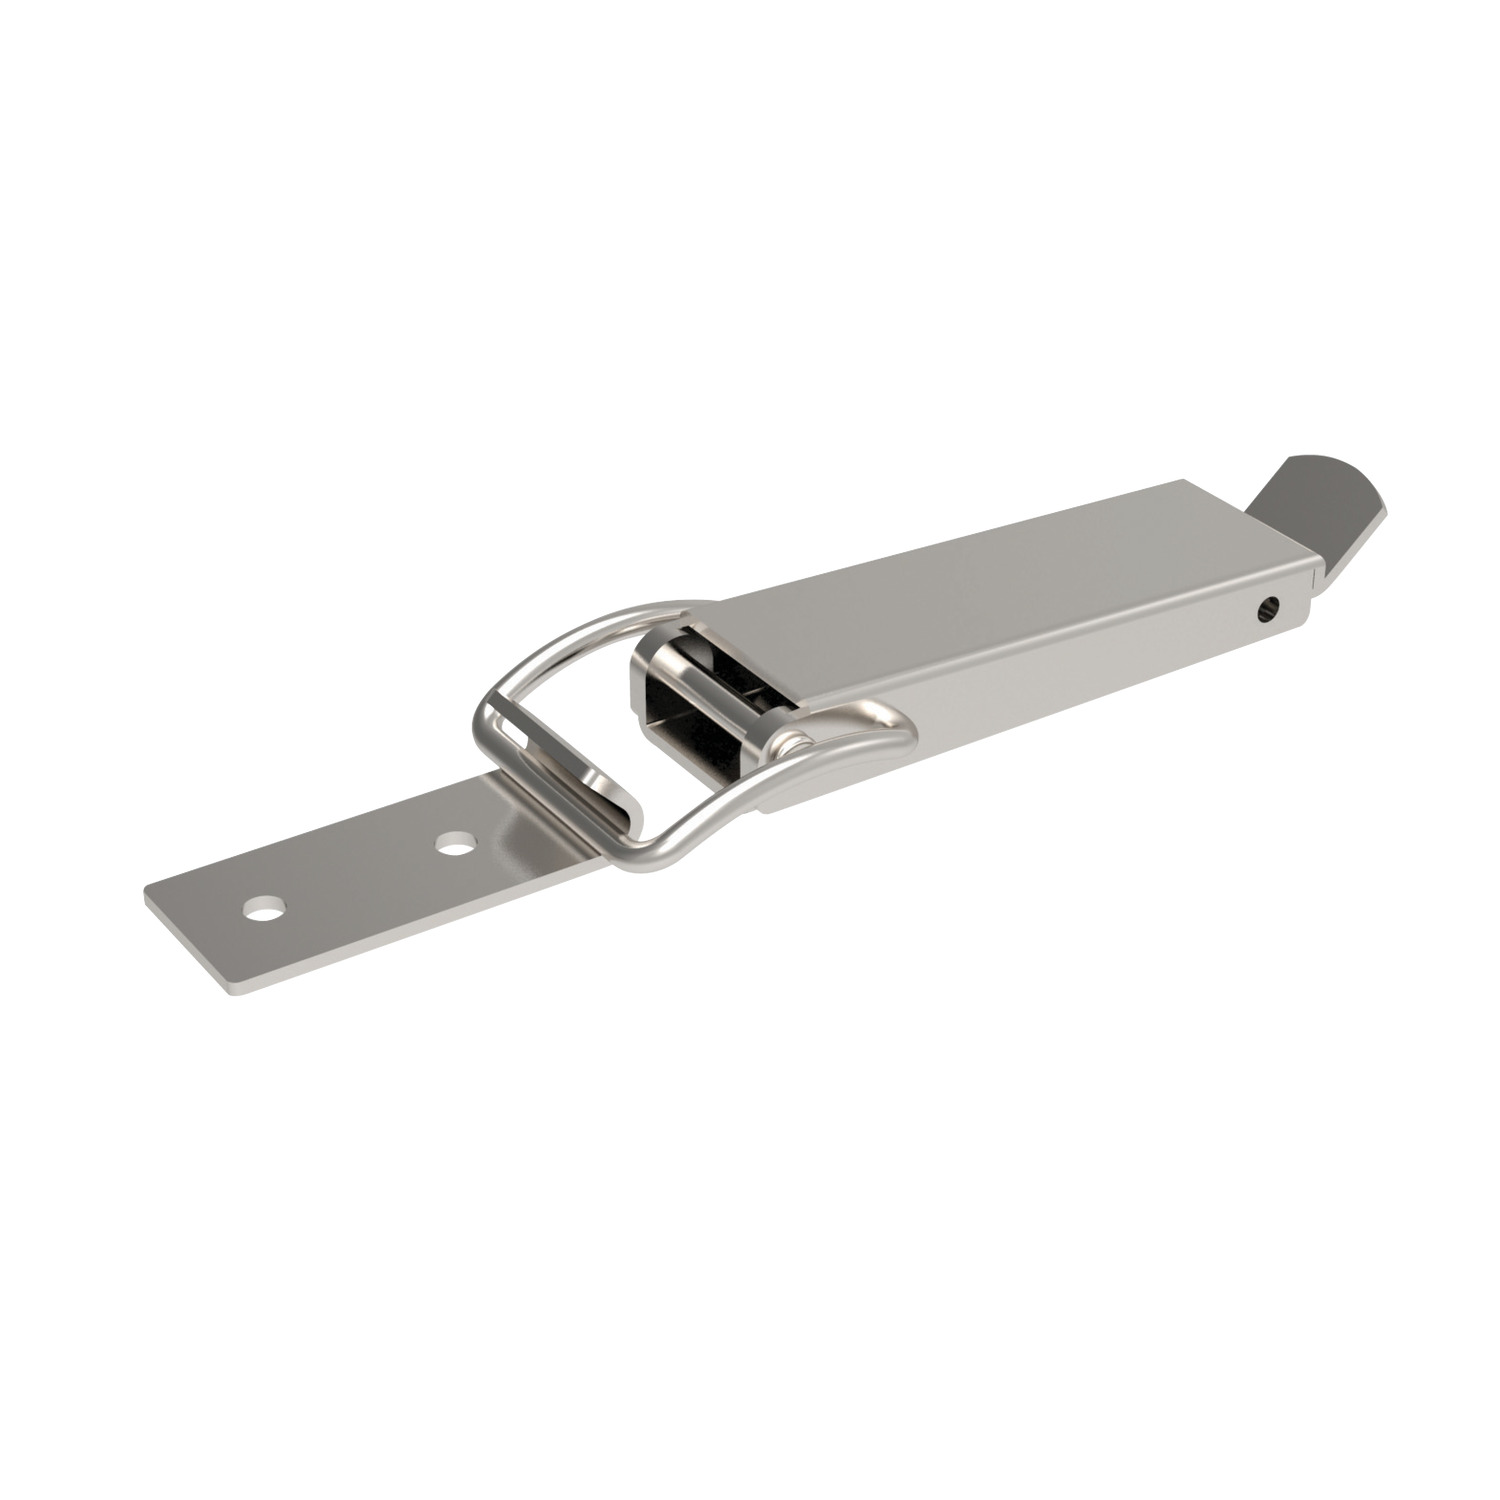 J0428.AC0004 Toggle Latches Zinc Plated Steel - 140,5 - 12,5 - 34